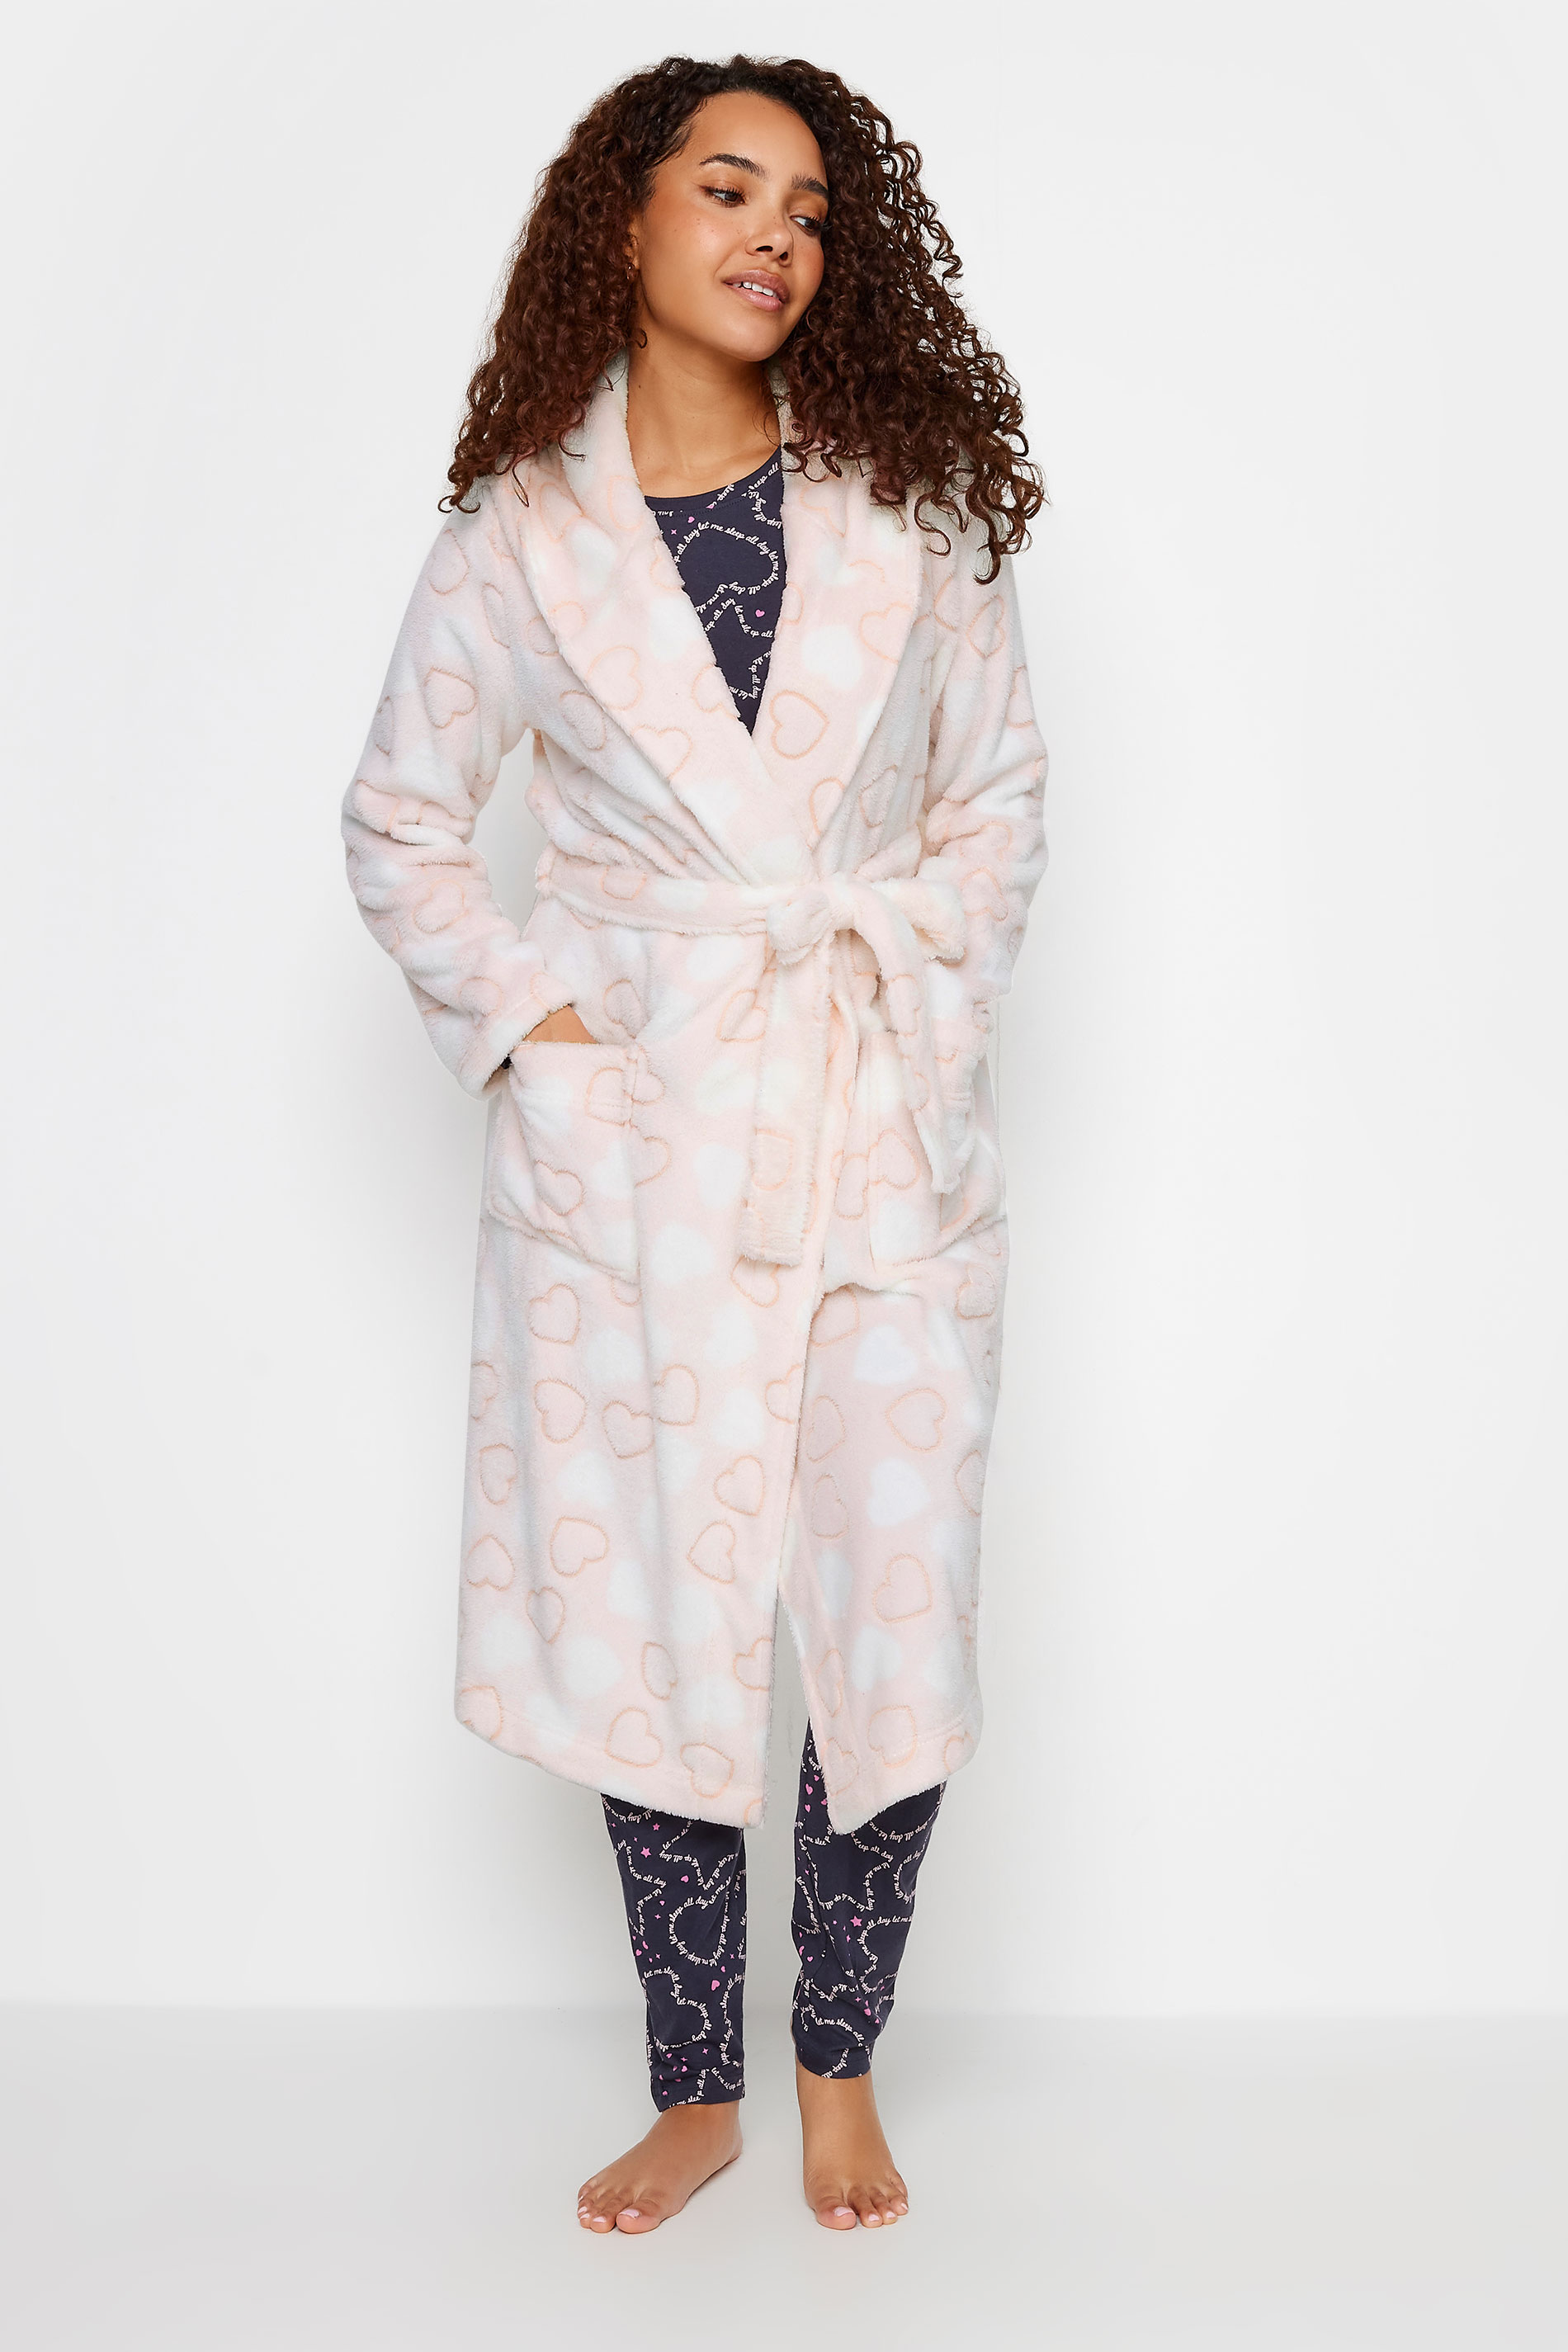 M&Co Pink Soft Touch Heart Print Hooded Dressing Gown | M&Co 1